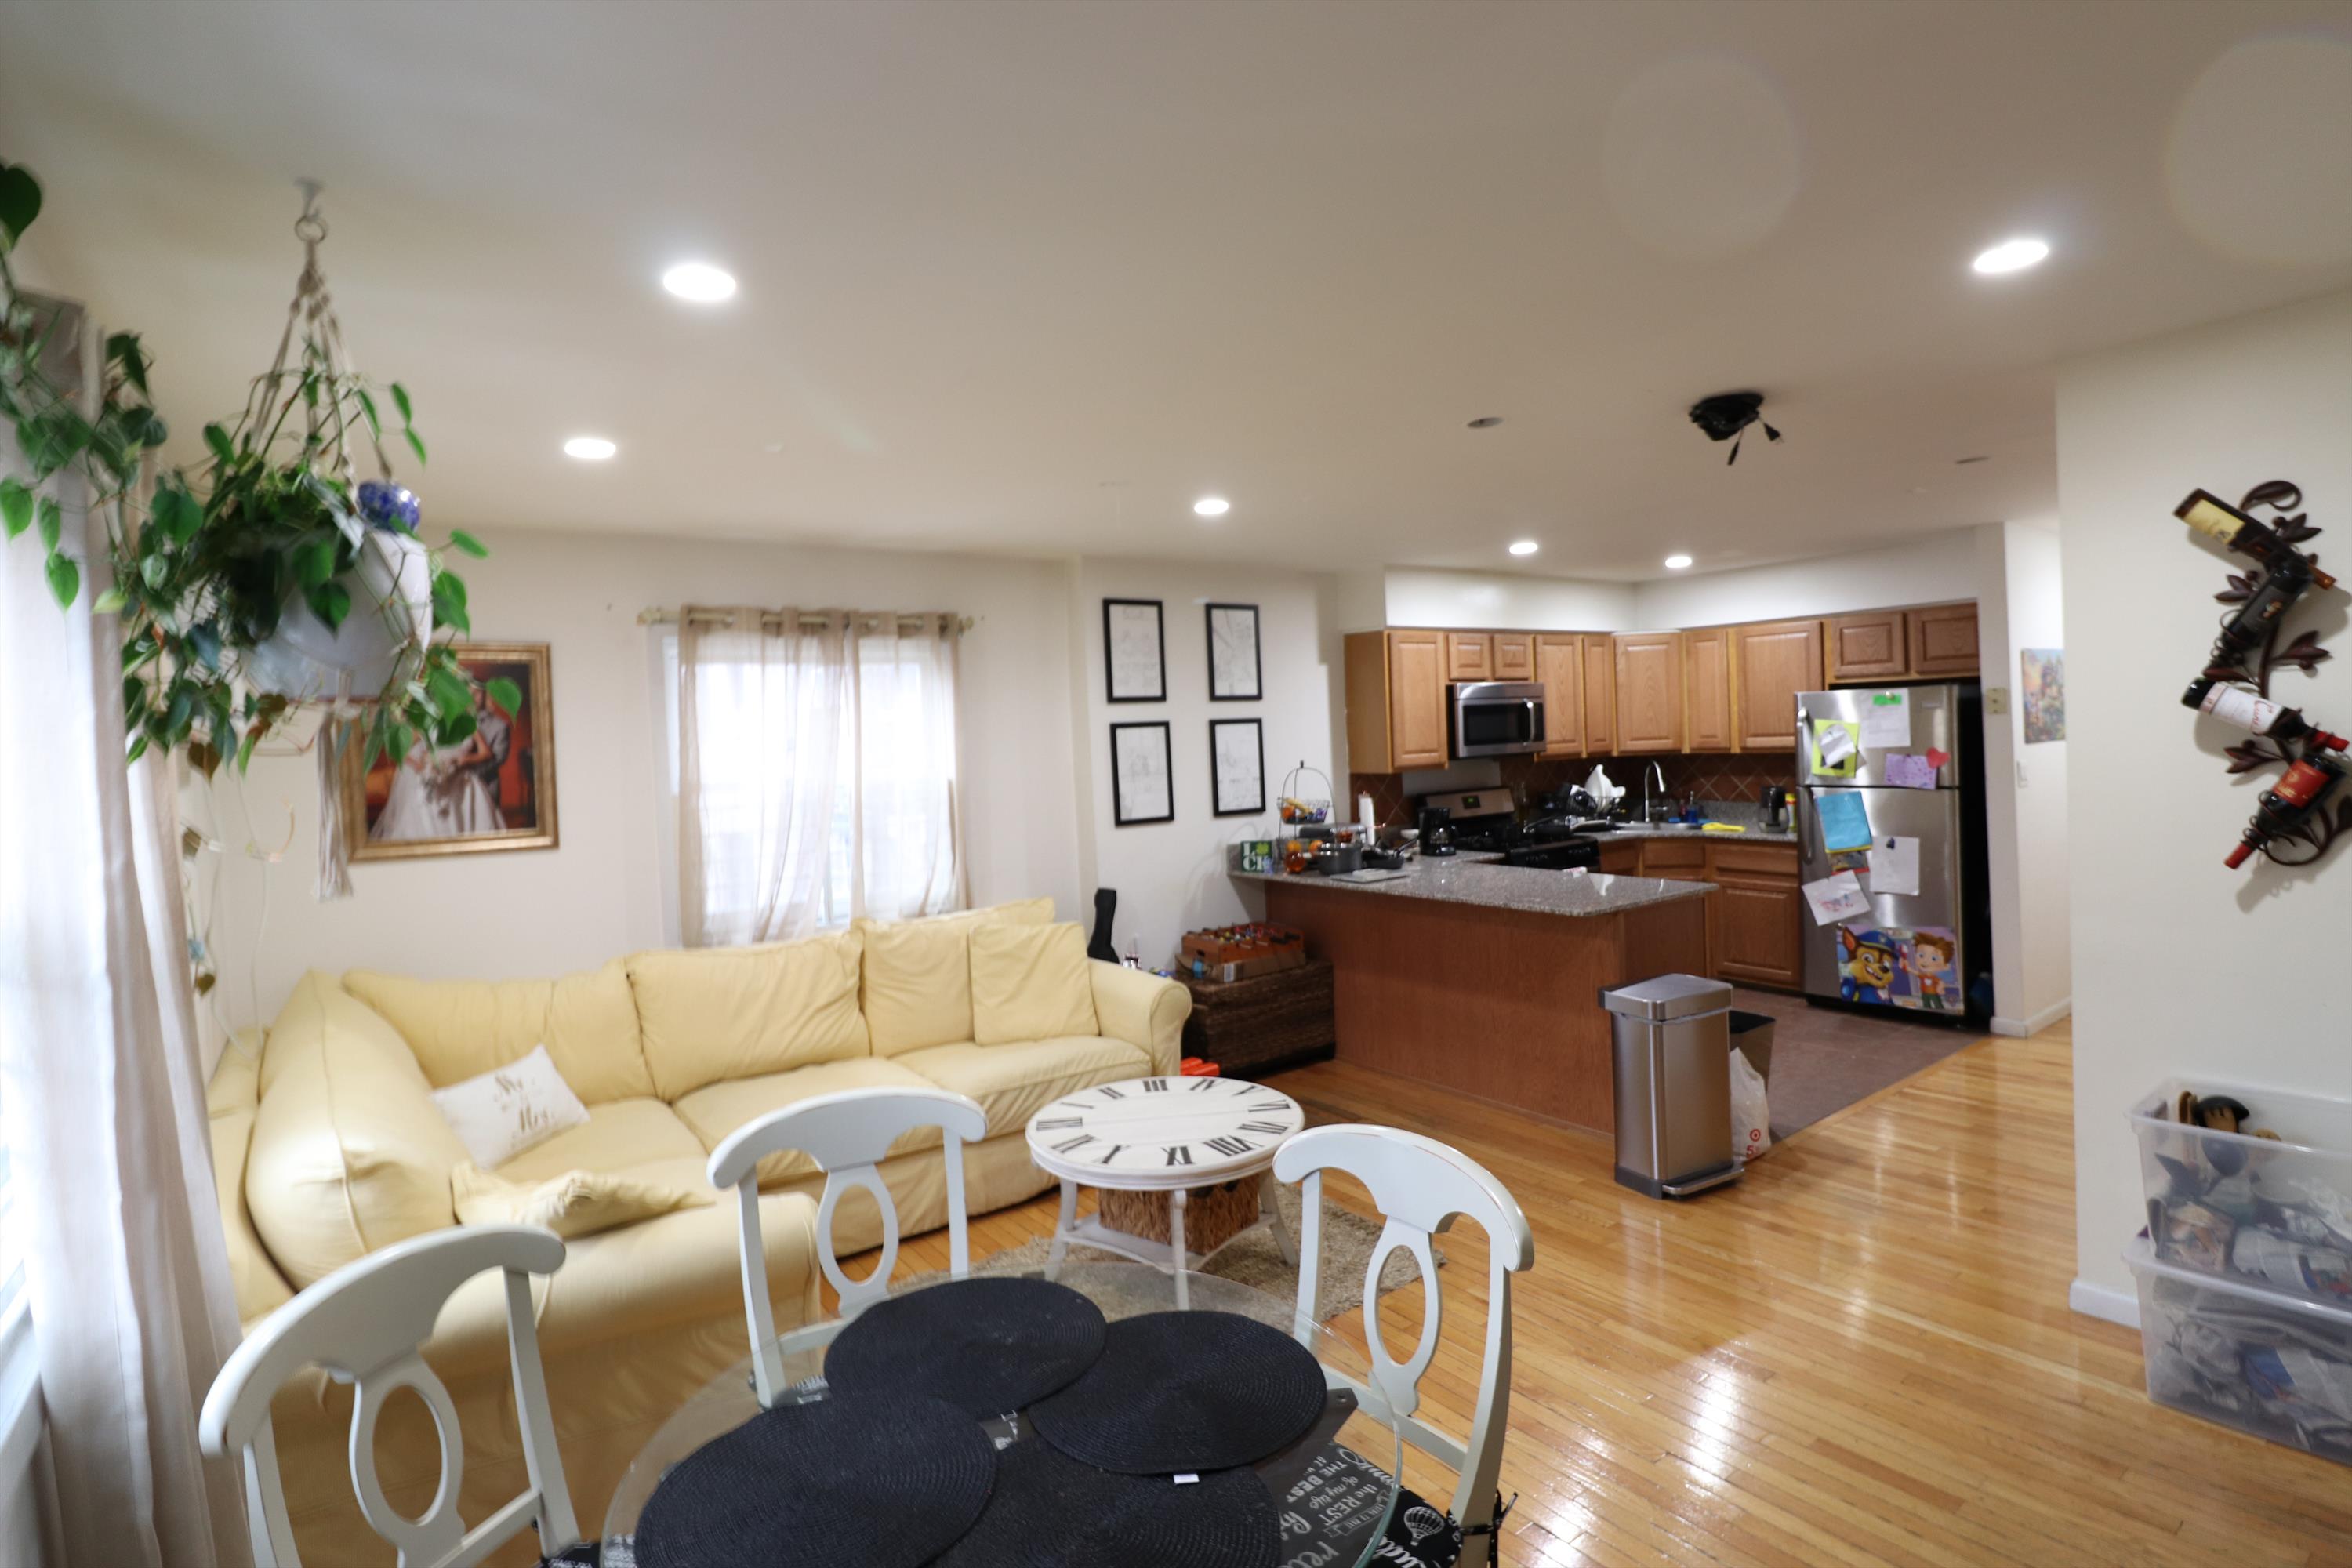 Excellent laid out 1 bed 1 bath, featuring hardwood floors, newer renovated kitchen, and 1 covered parking spot. NO broker fee. Available 5/15. no pets.